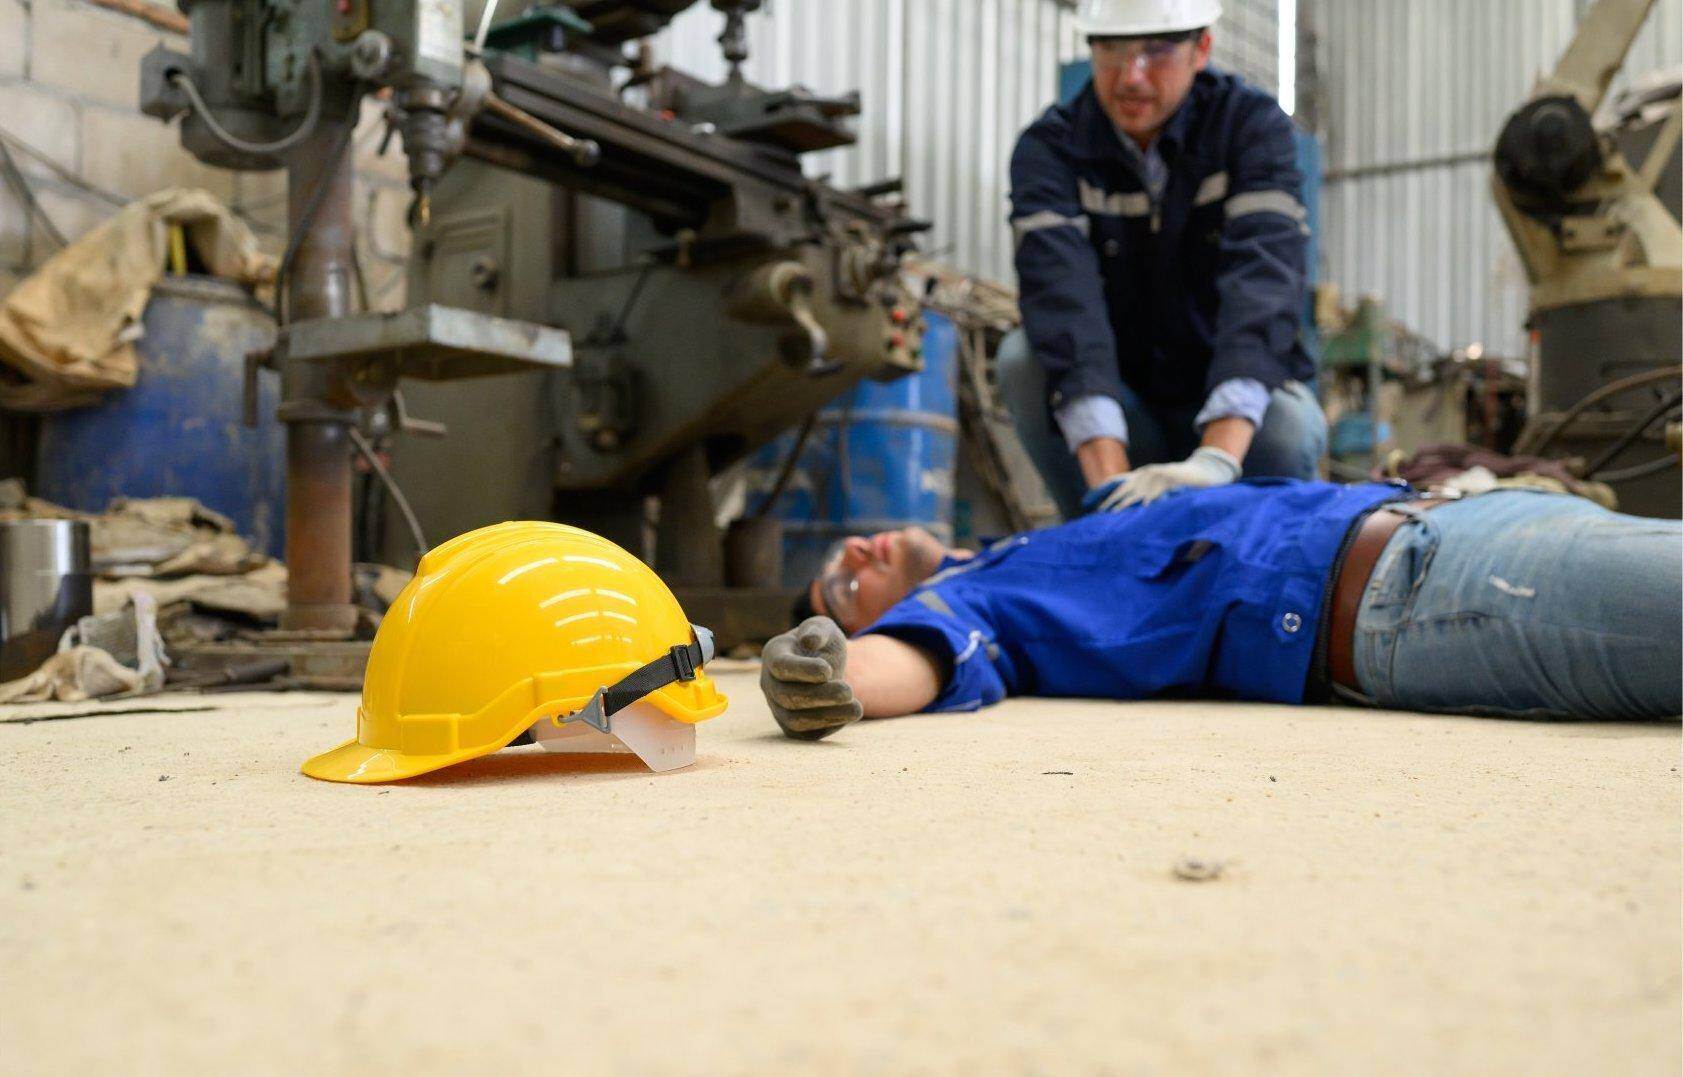 An unconscious man who has been injured on the job who will file for workers compensation in Atlanta, Georgia